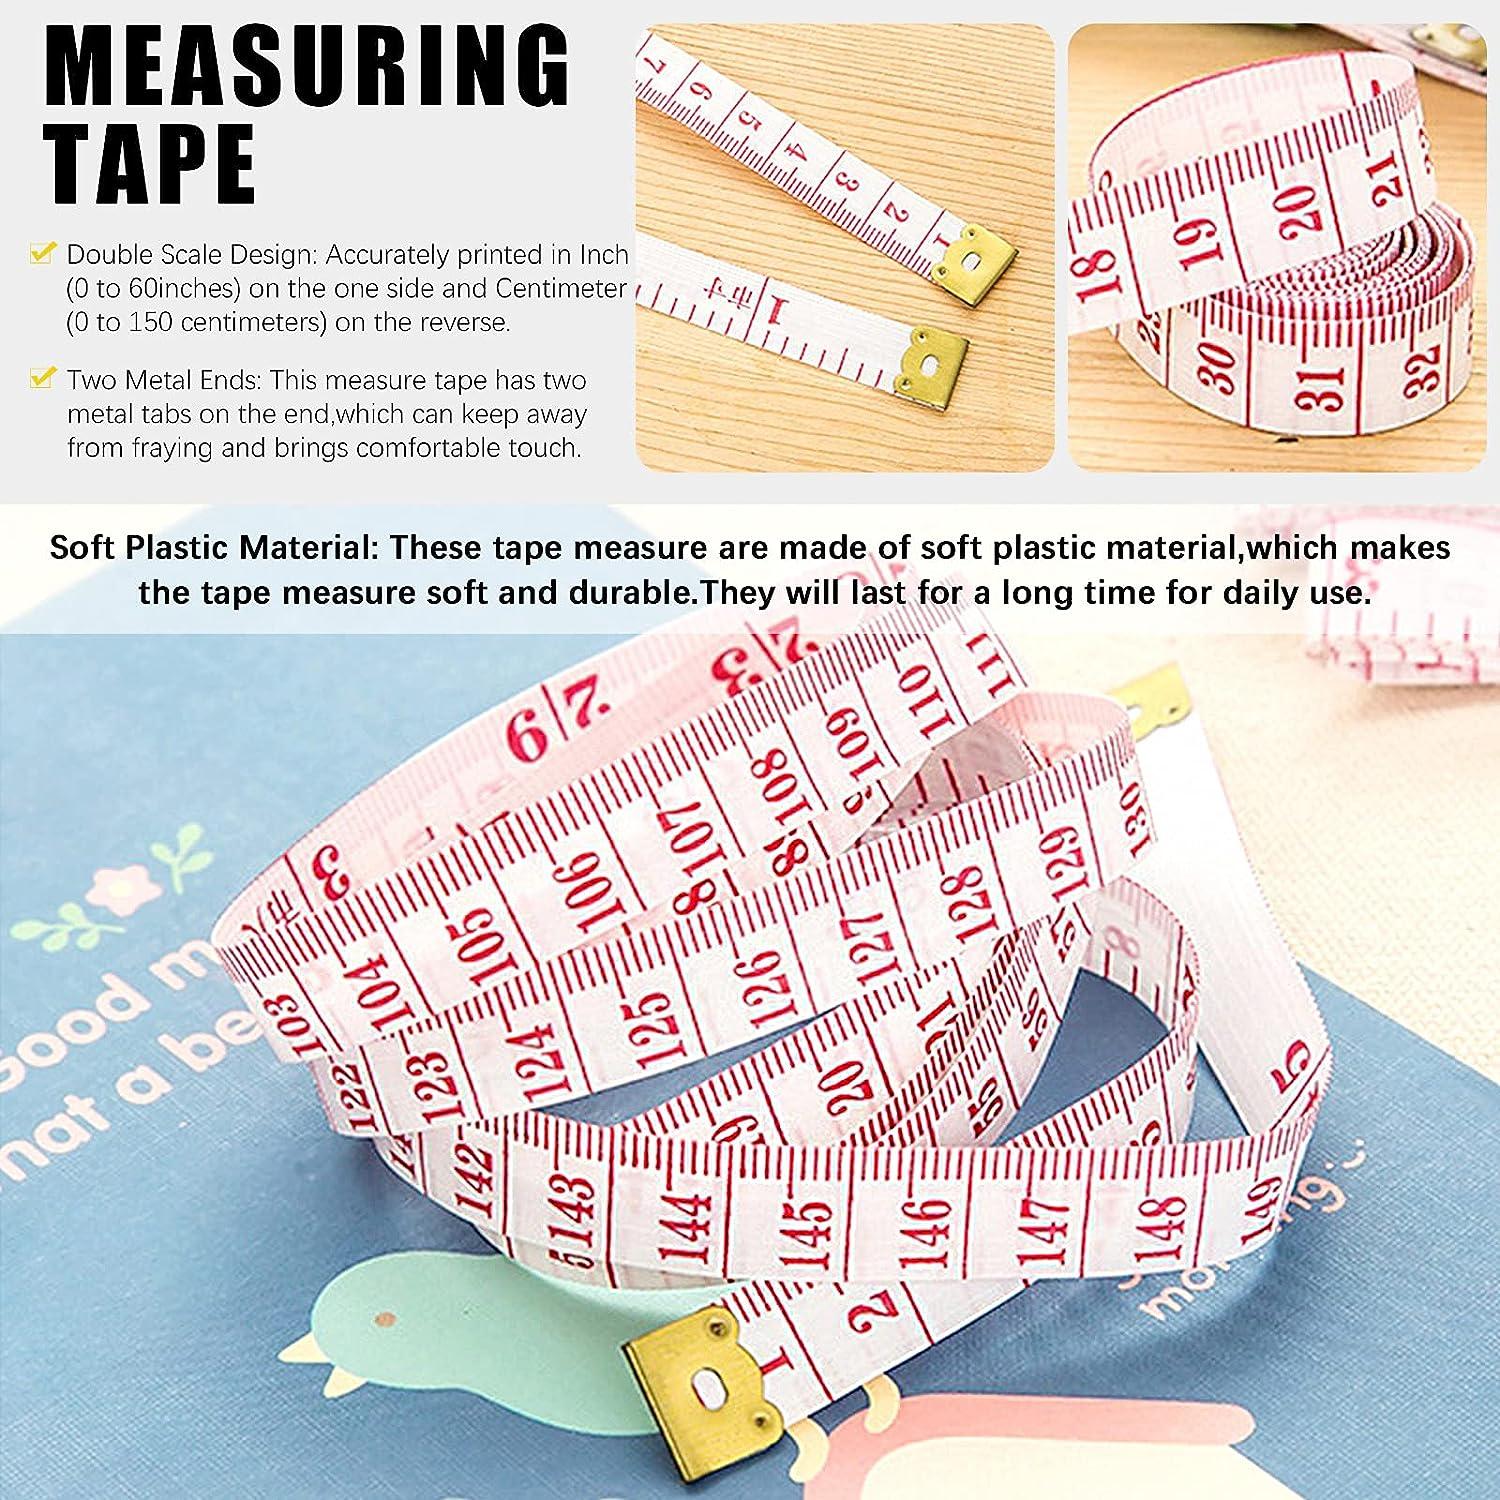 Sewing Kit - Tailor Tape Measure + Full Sewing Needle Set +